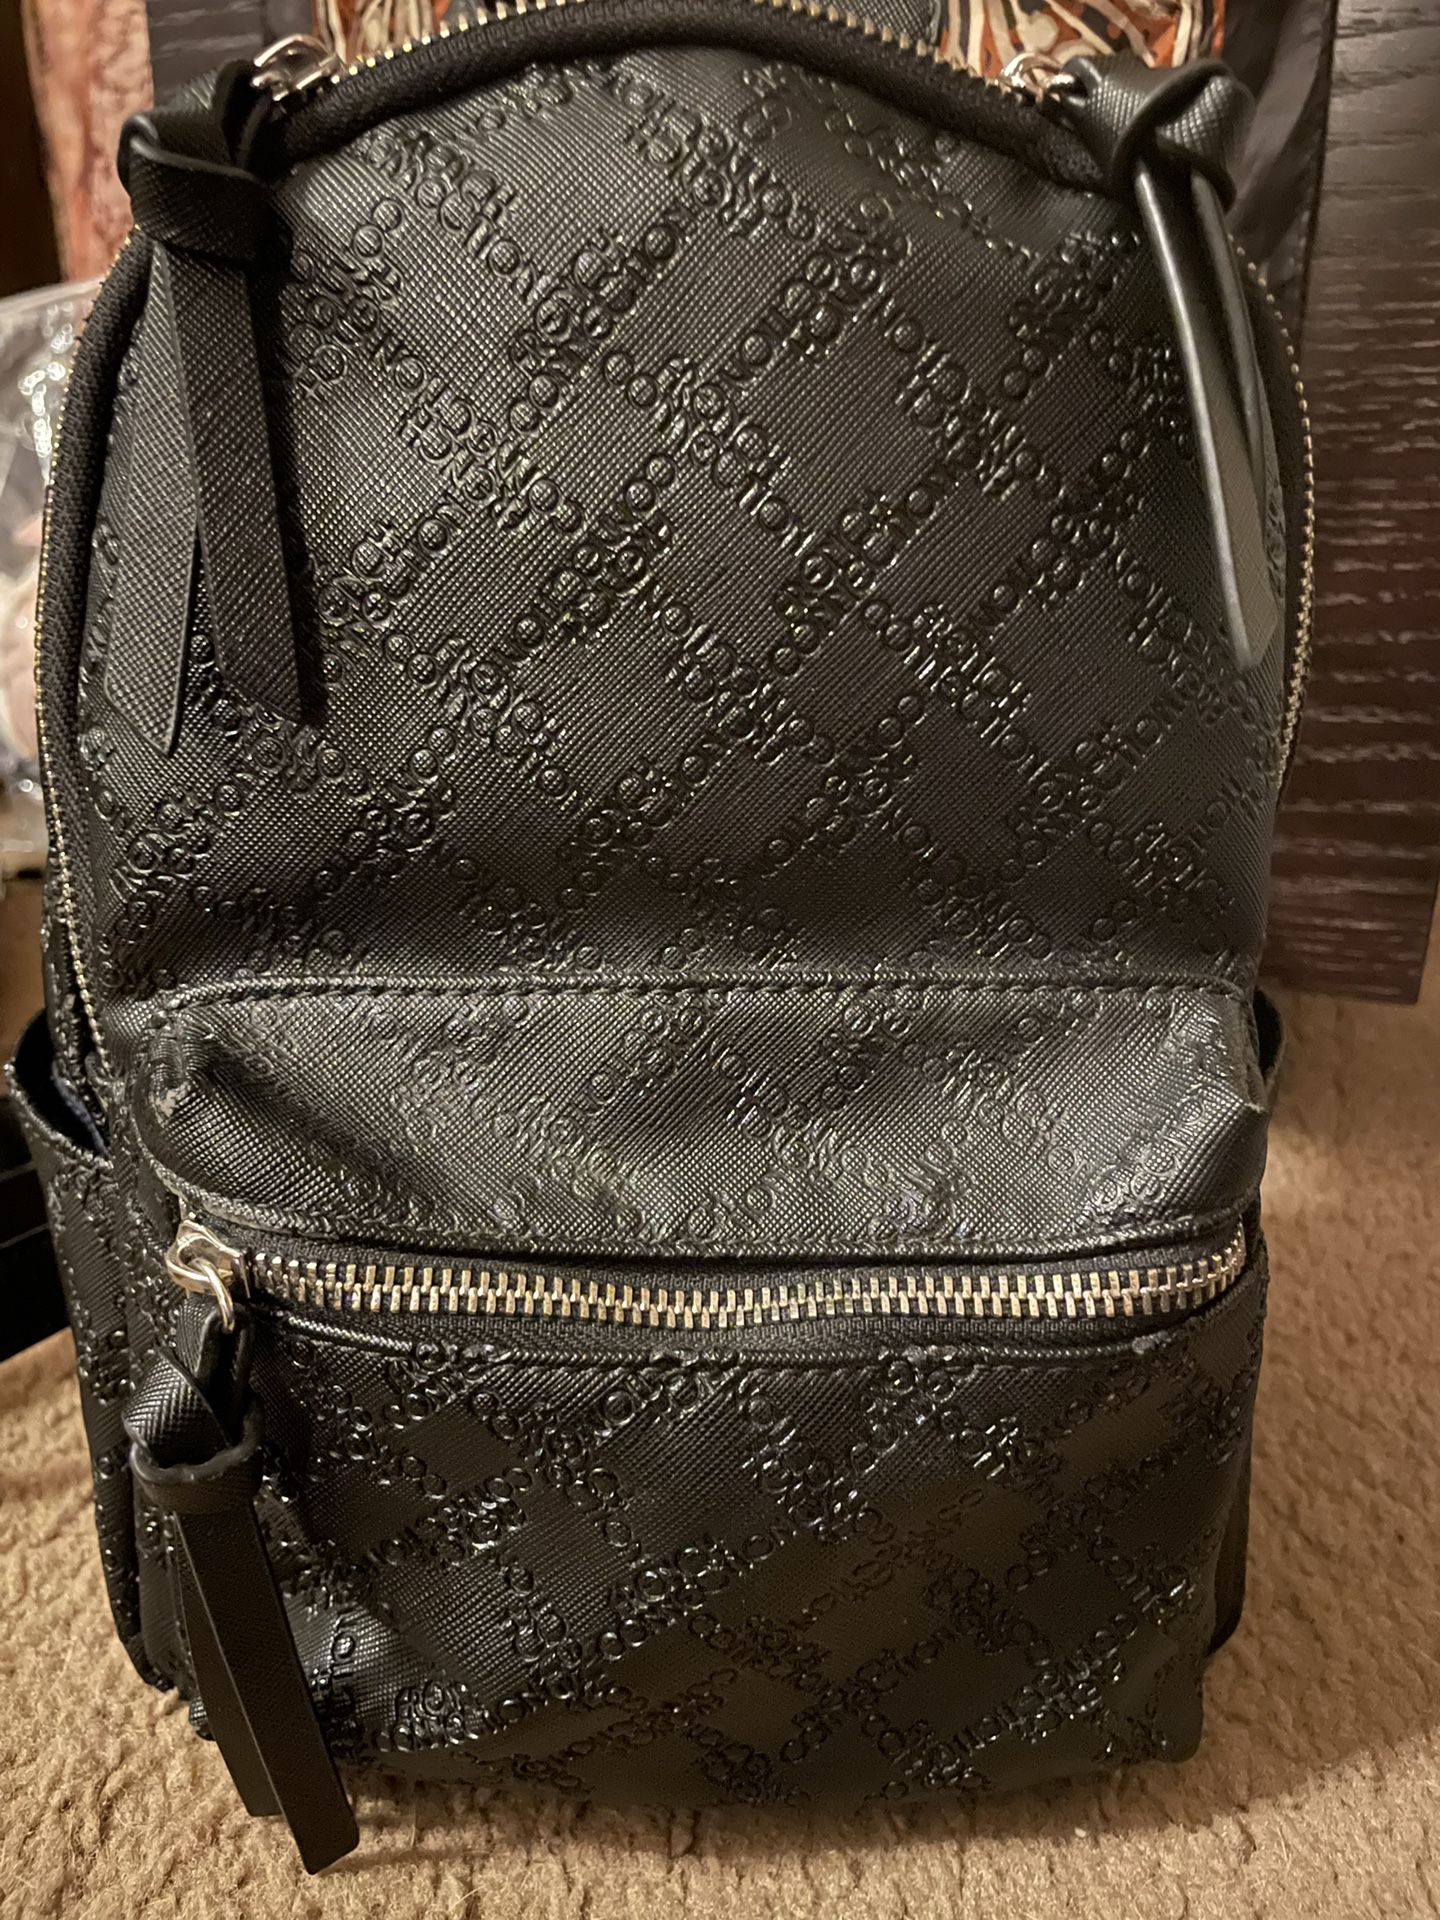 French Connection Mini Backpack & Adidas Mini Backpack